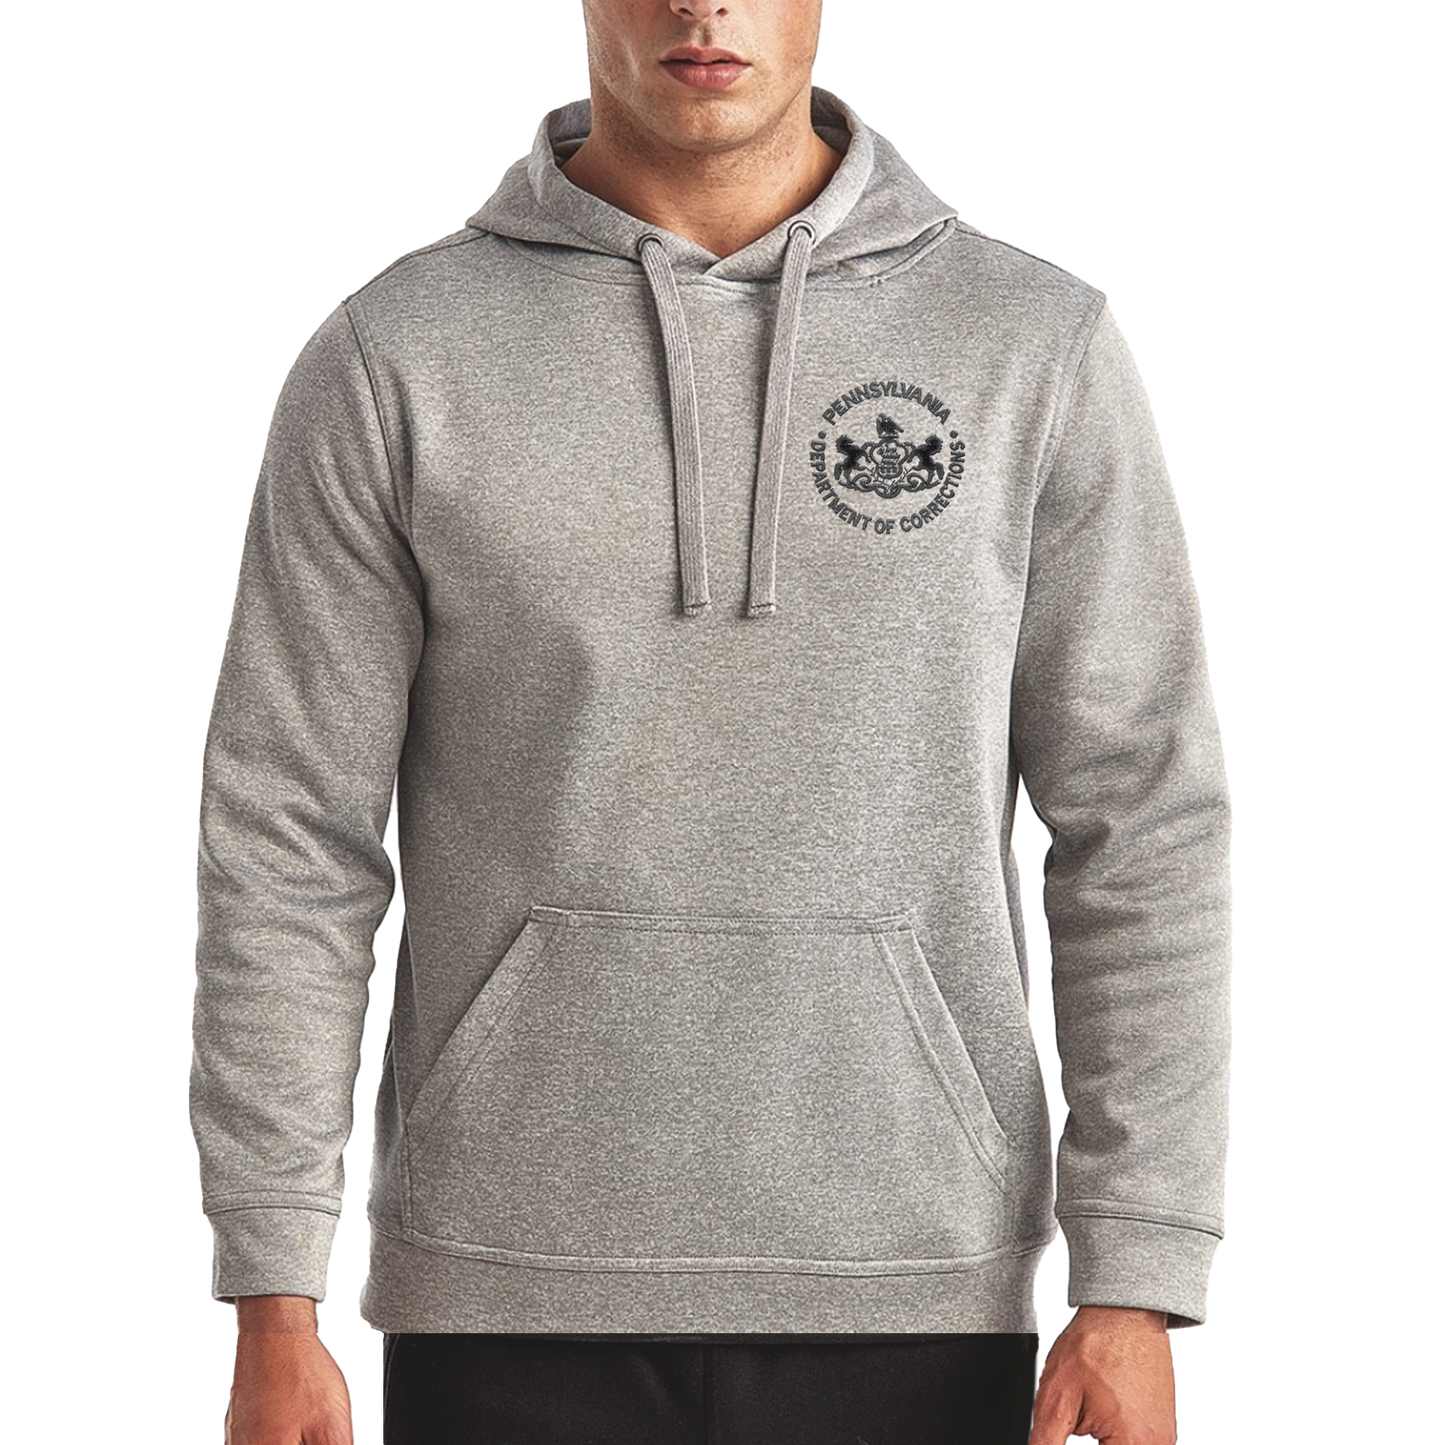 Performance Hooded Sweatshirt with Embroidered Department of Corrections Logos (Various Colors)